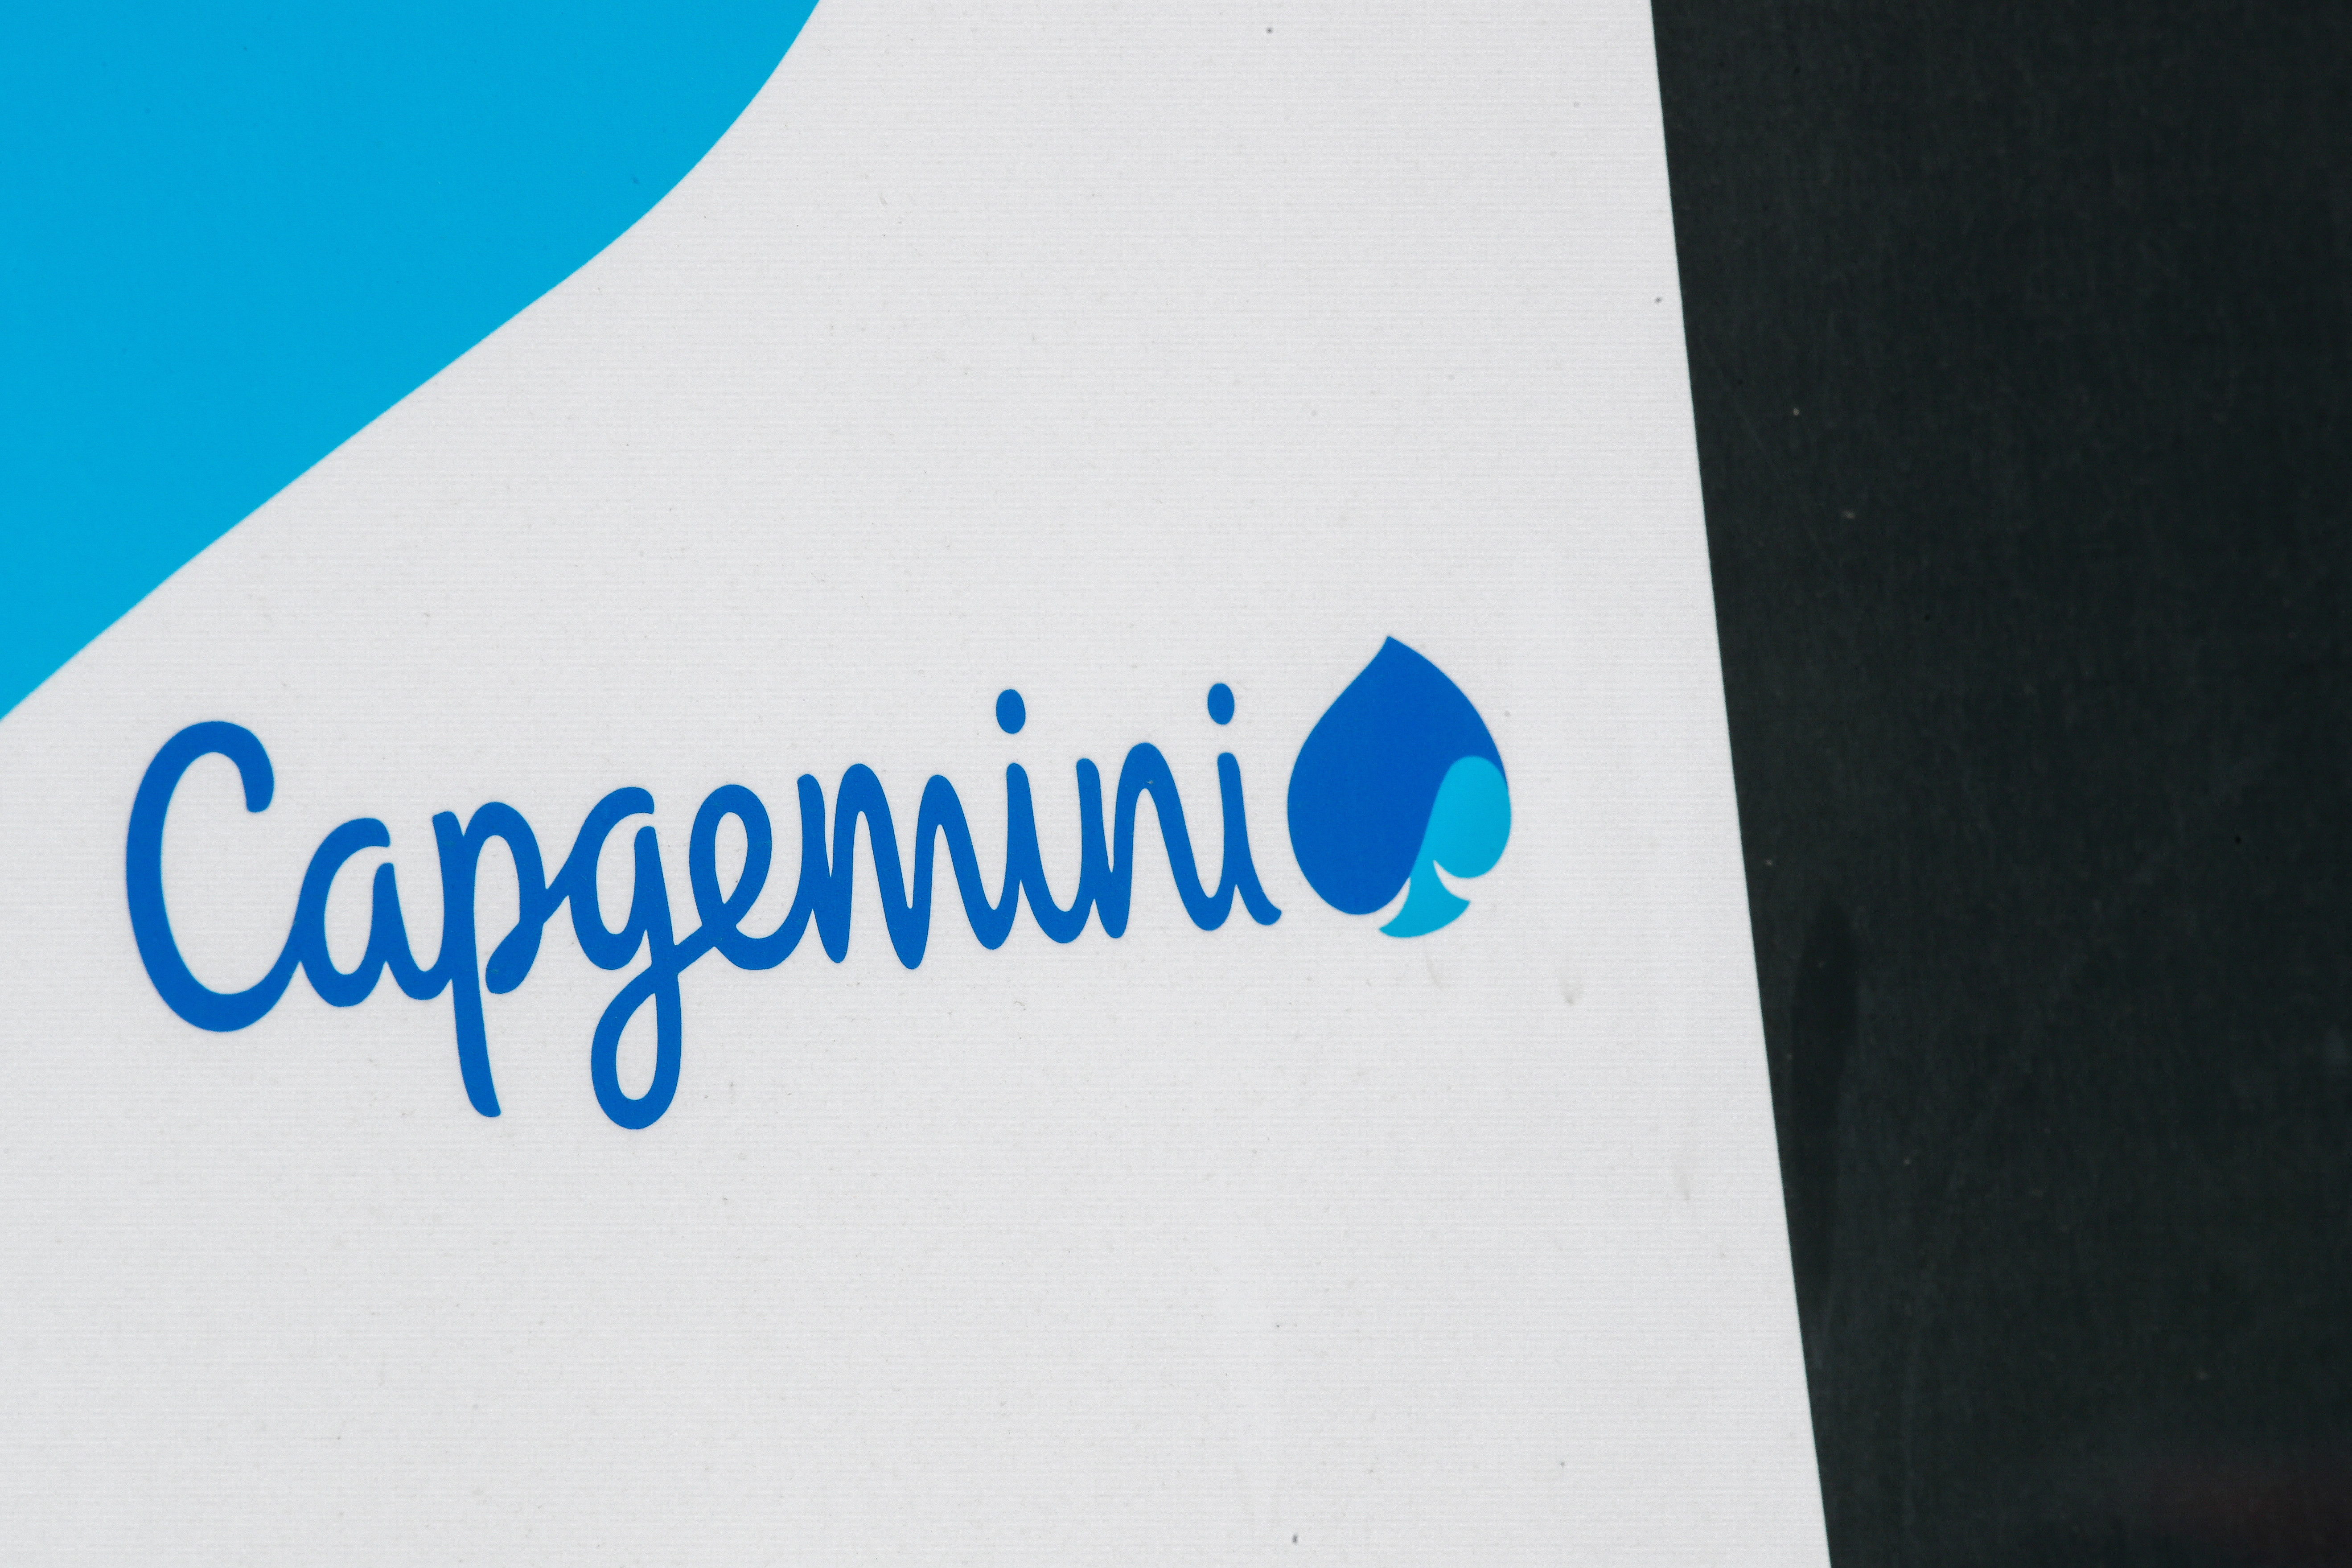 The Capgemini logo is seen at the company's office in Issy-les-Moulineaux near Paris